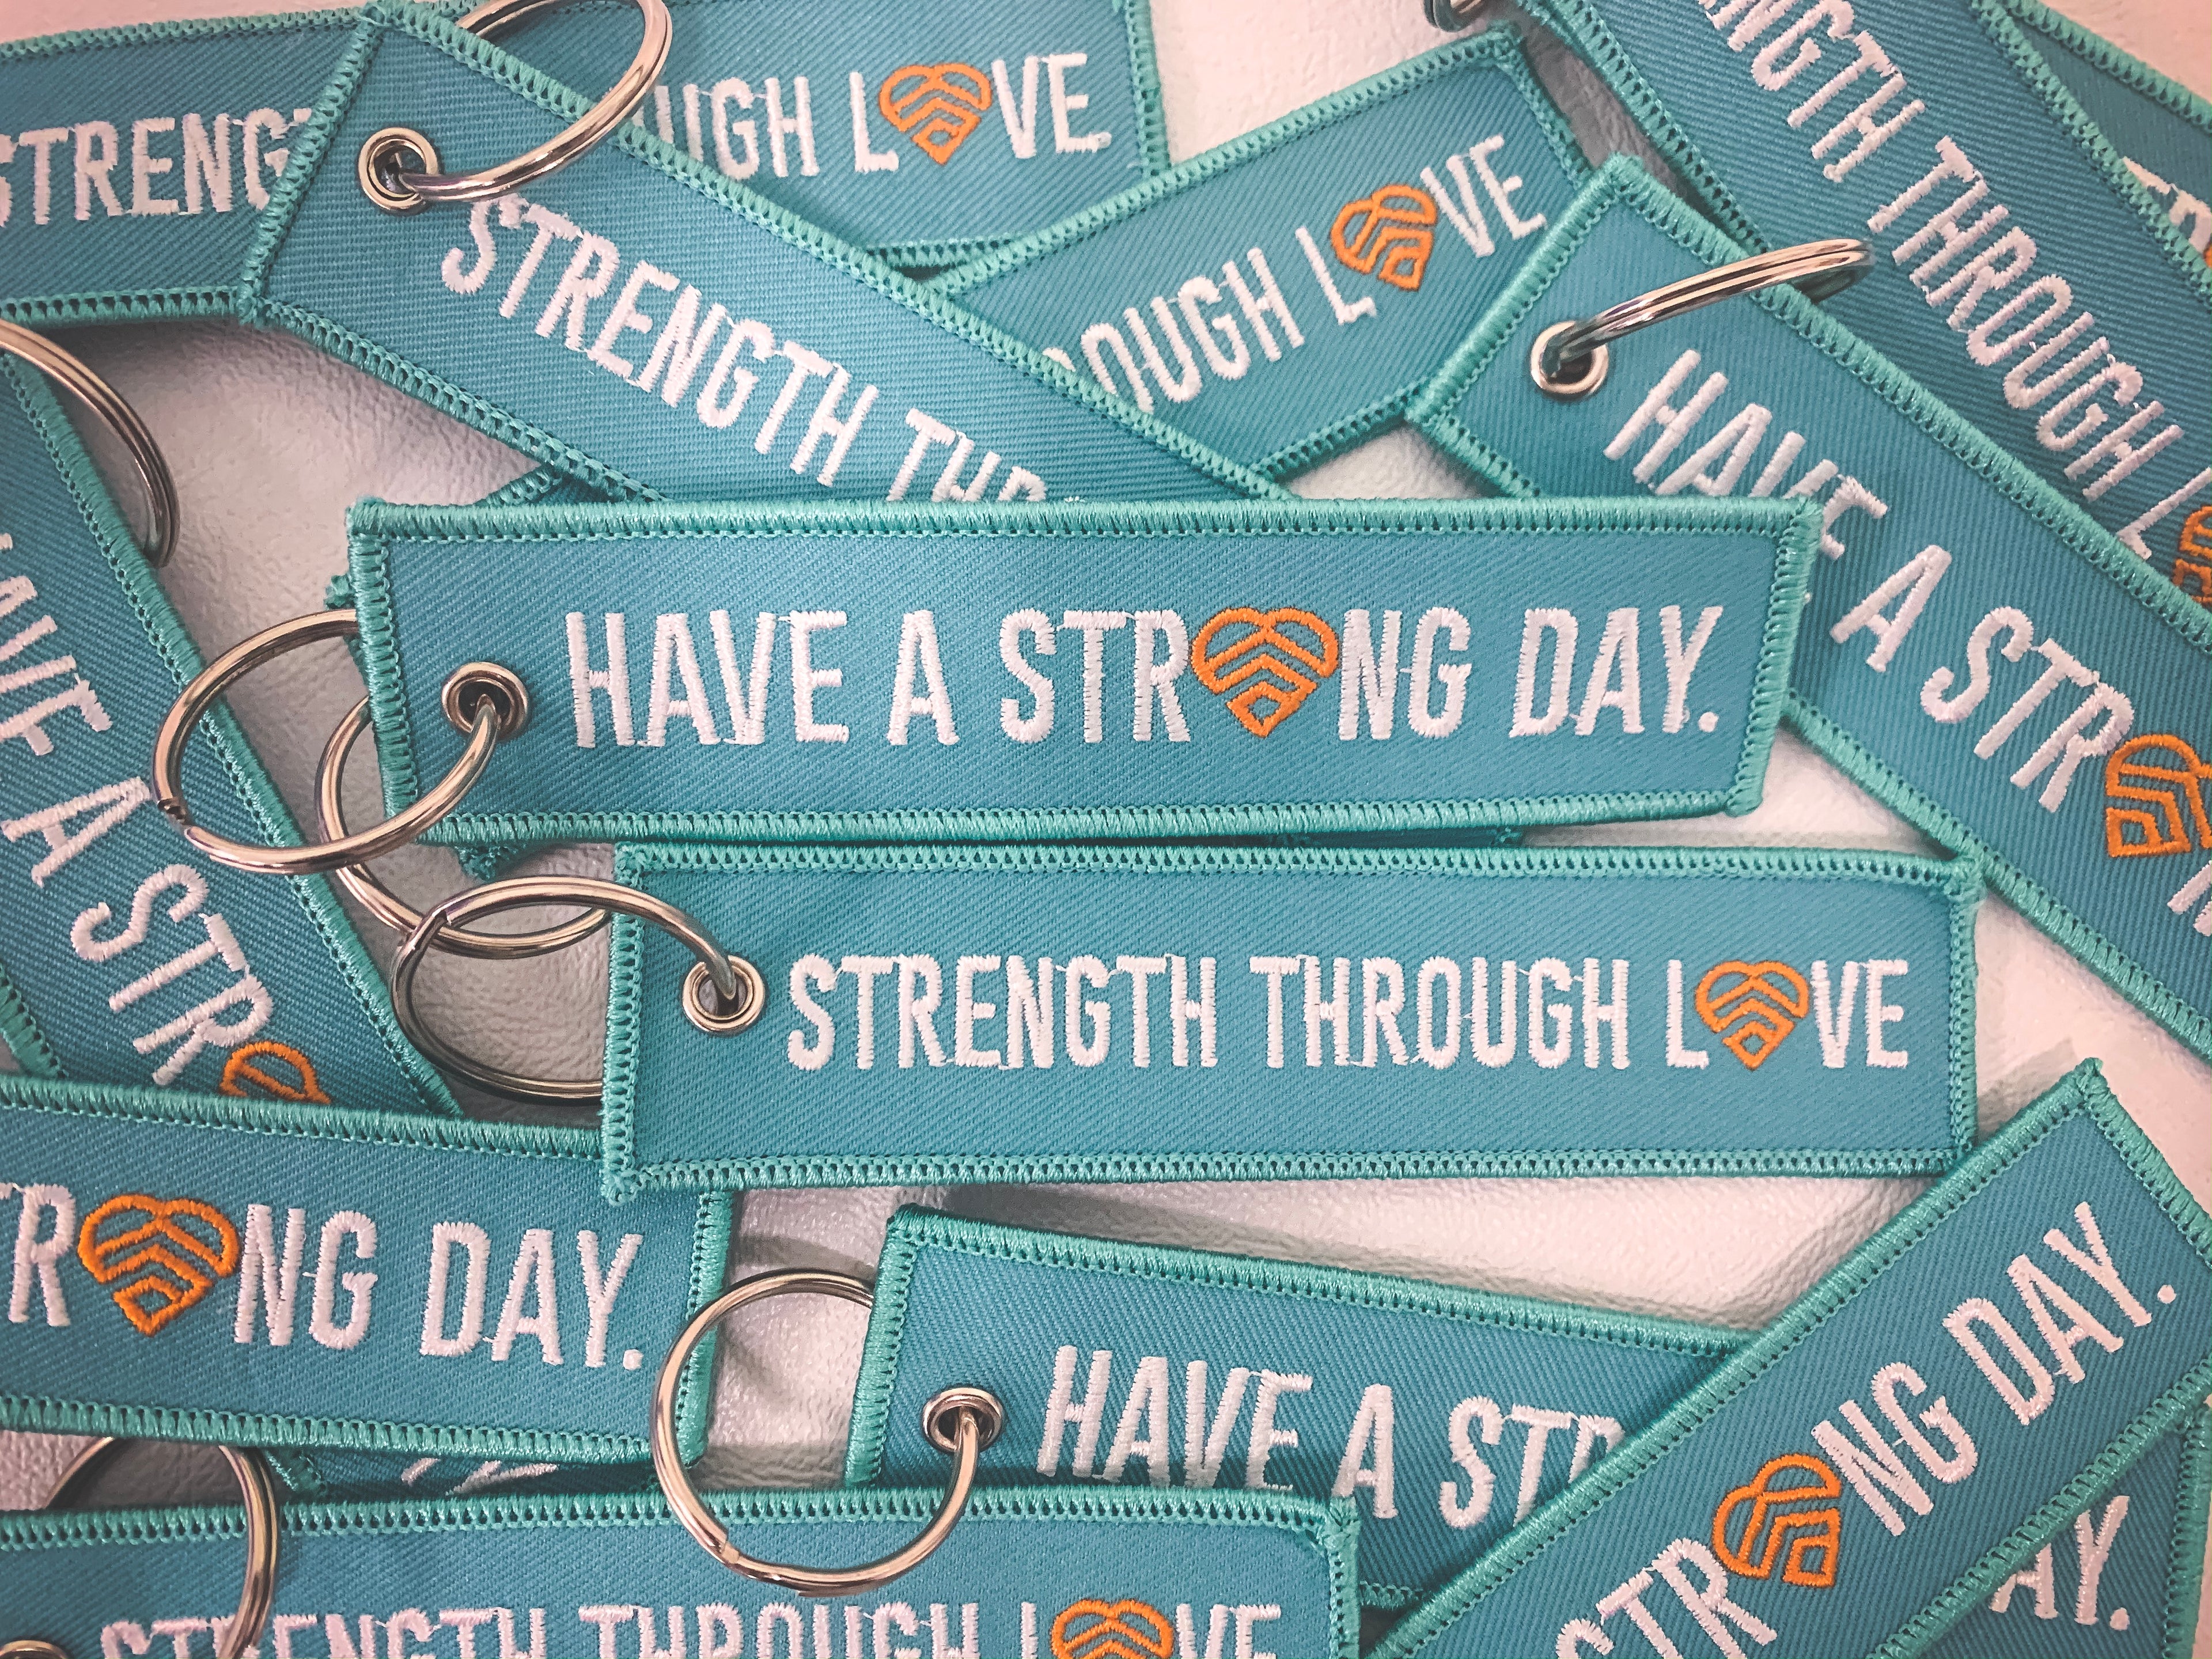 HAVE A STRONG DAY. | MENTAL HEALTH | FLIGHT KEYCHAIN - LOVE, ANXIETY, DEPRESSION, SELF-CARE - HAVE A STRONG DAY. 